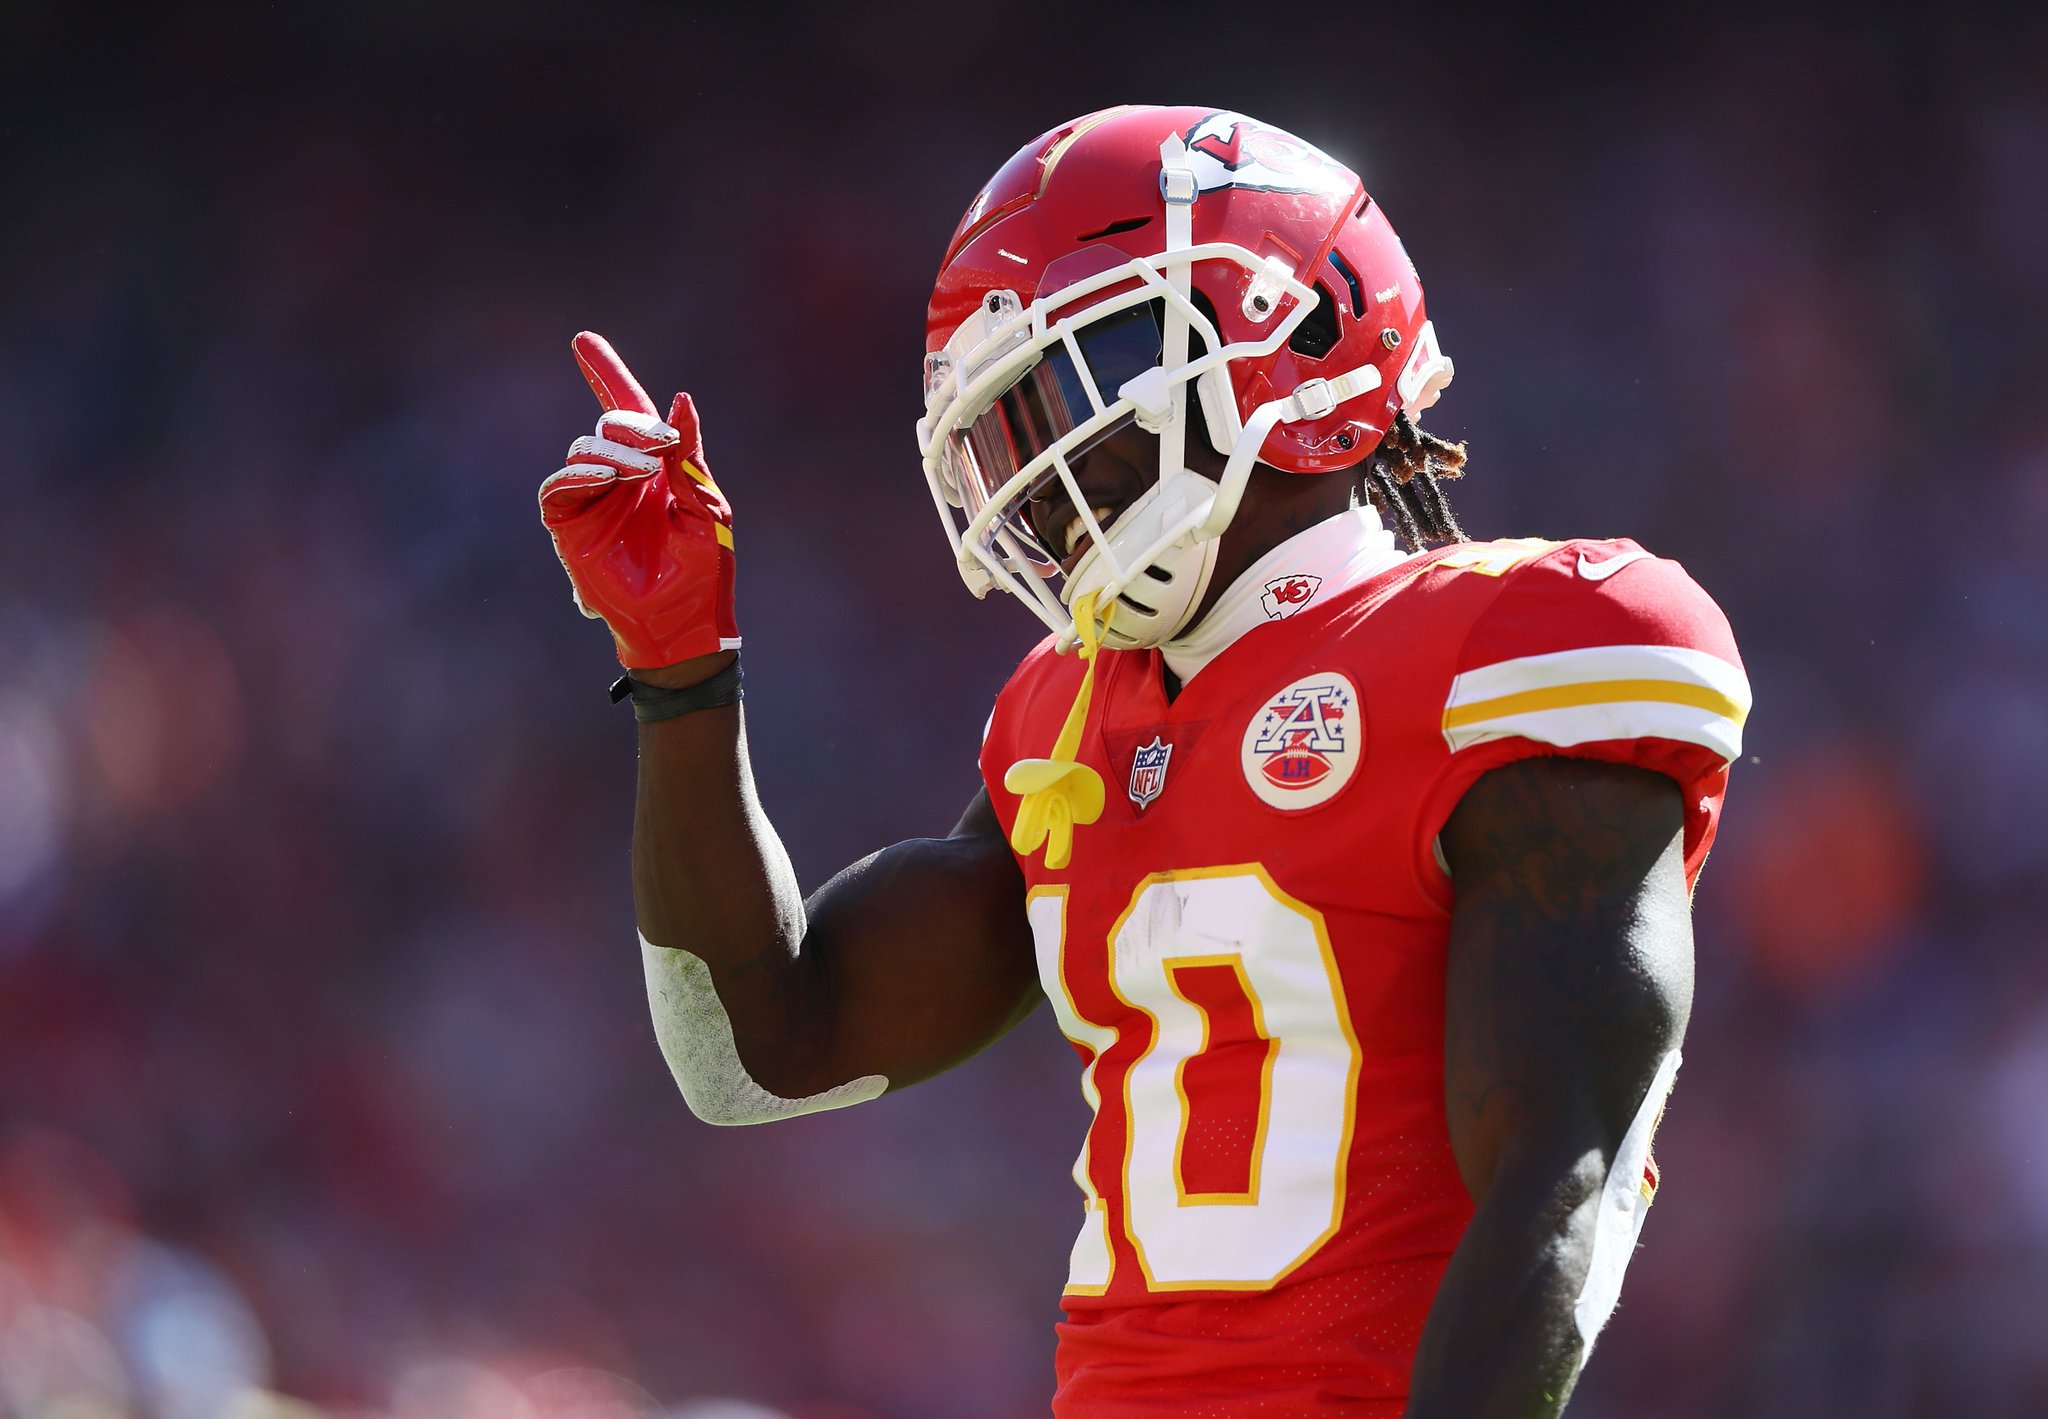 “Breaking: The NFL will not discipline Chiefs WR Tyreek Hill, who was accus...